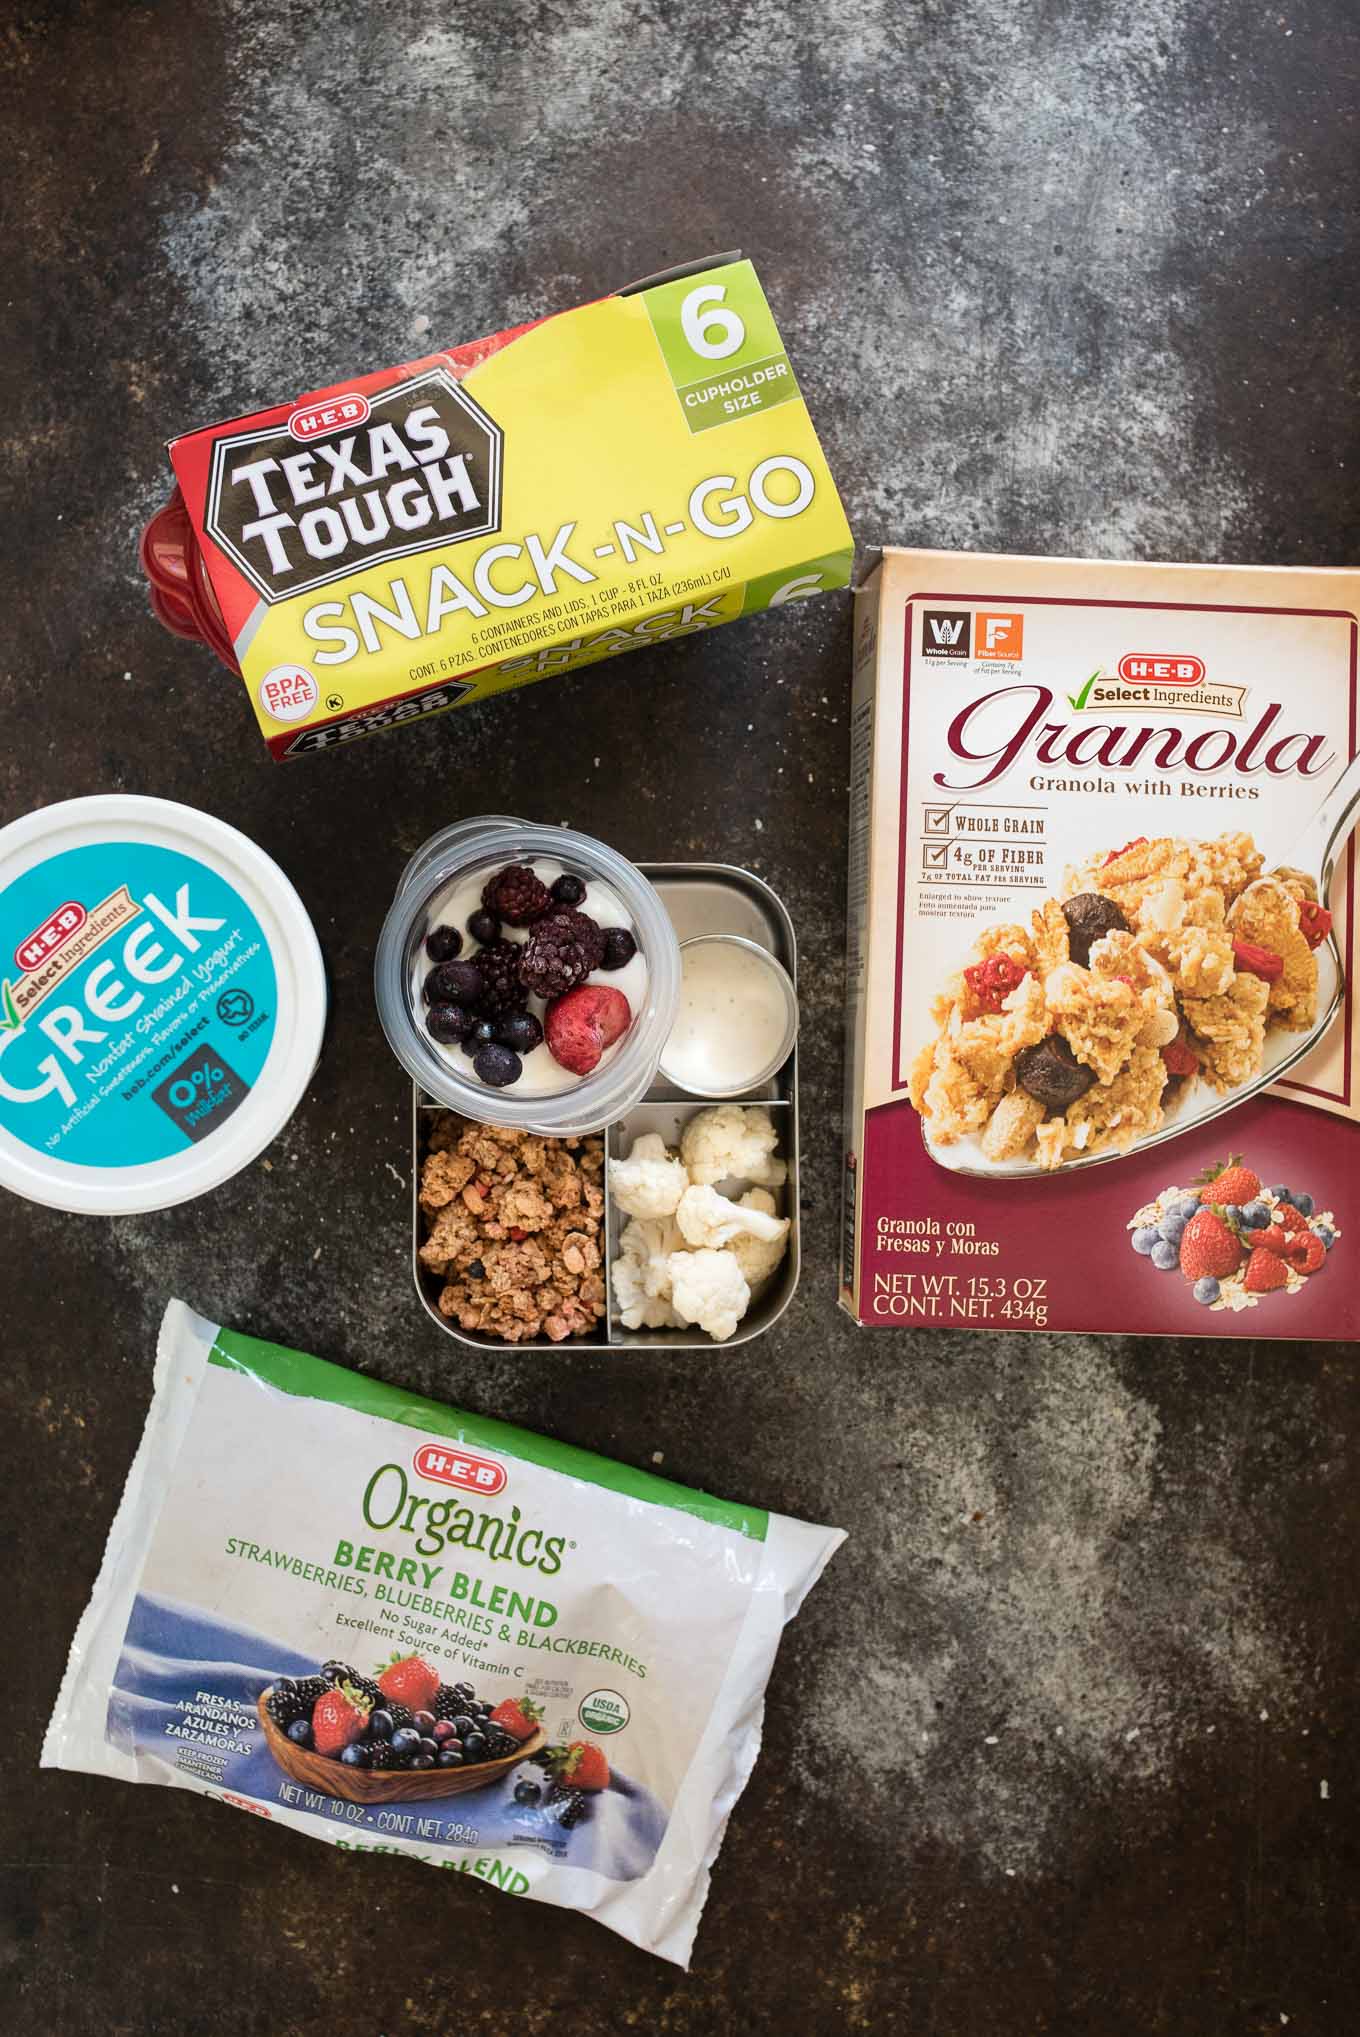 Enjoy these 10 nutritious, well-balanced, kid (and adult) friendly lunch box ideas that will inspire you to get packing! Plus a fun Pancake Sandwich recipe that your kids will love.